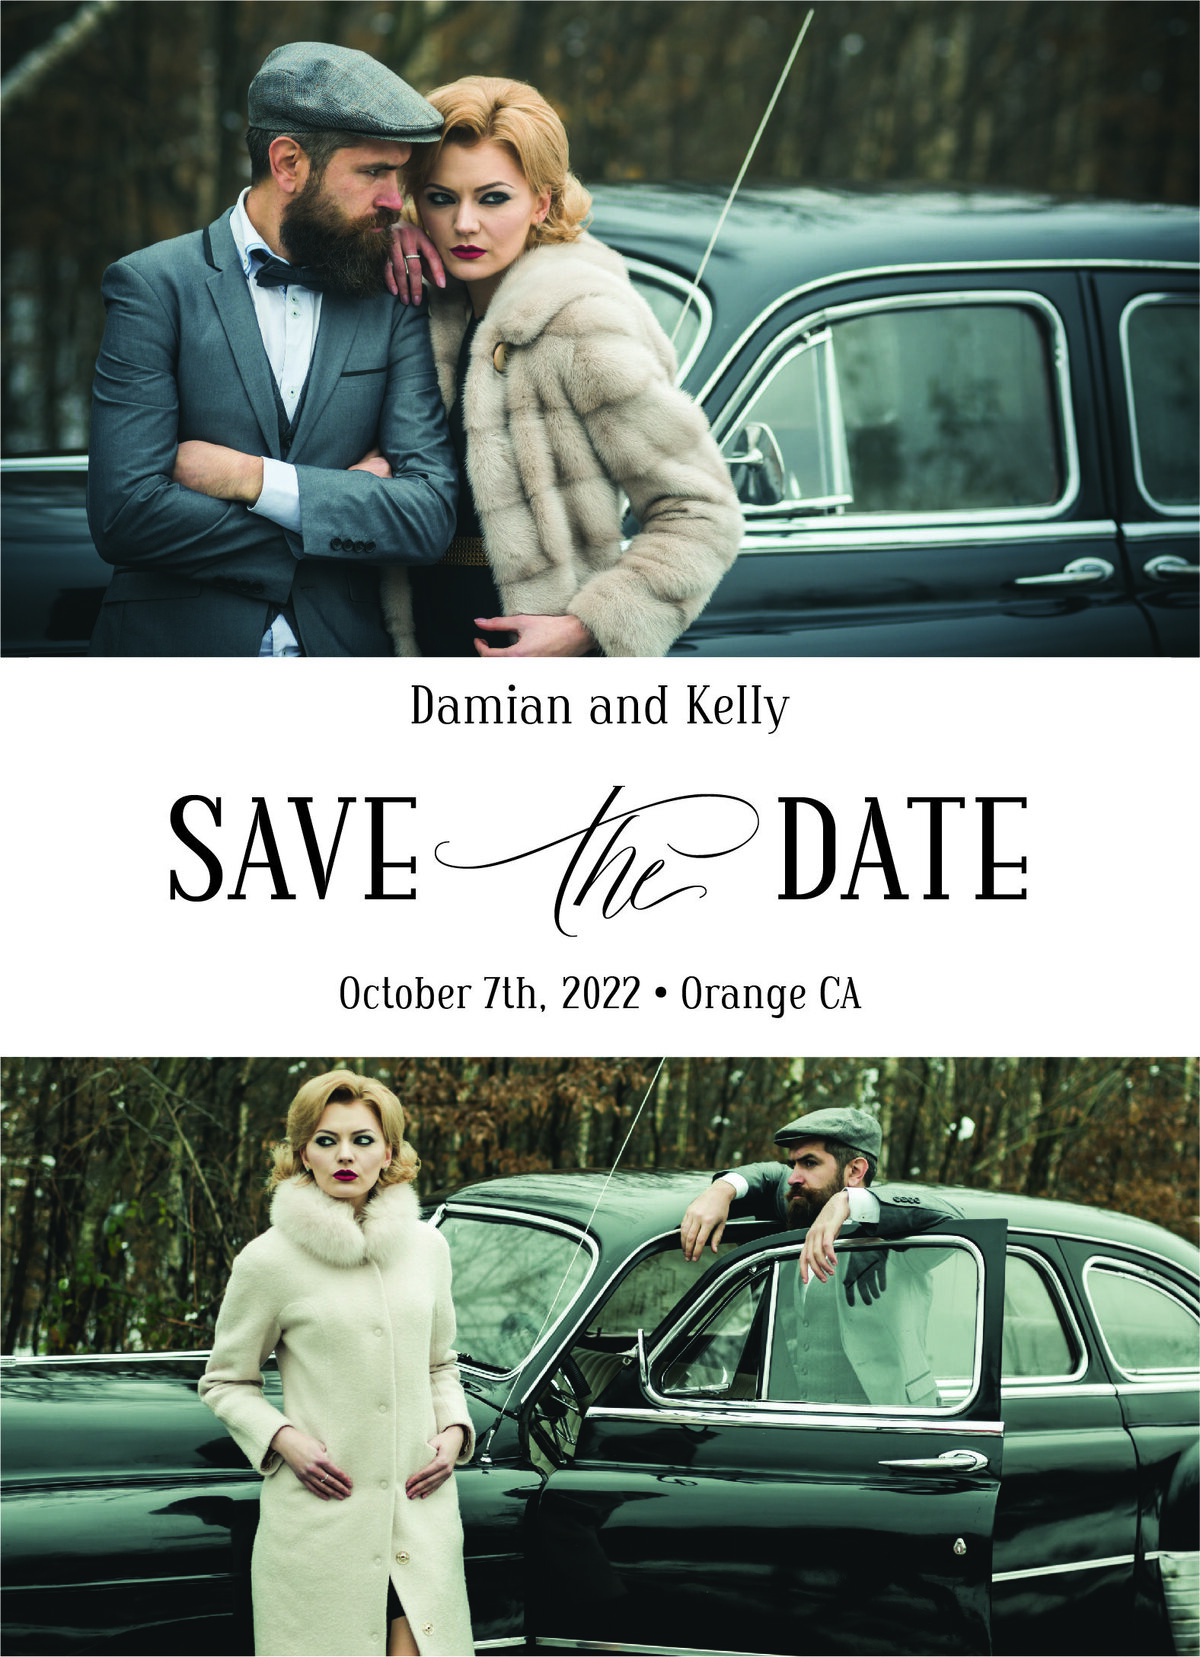 S109_SeeingDouble_Save-The-Date